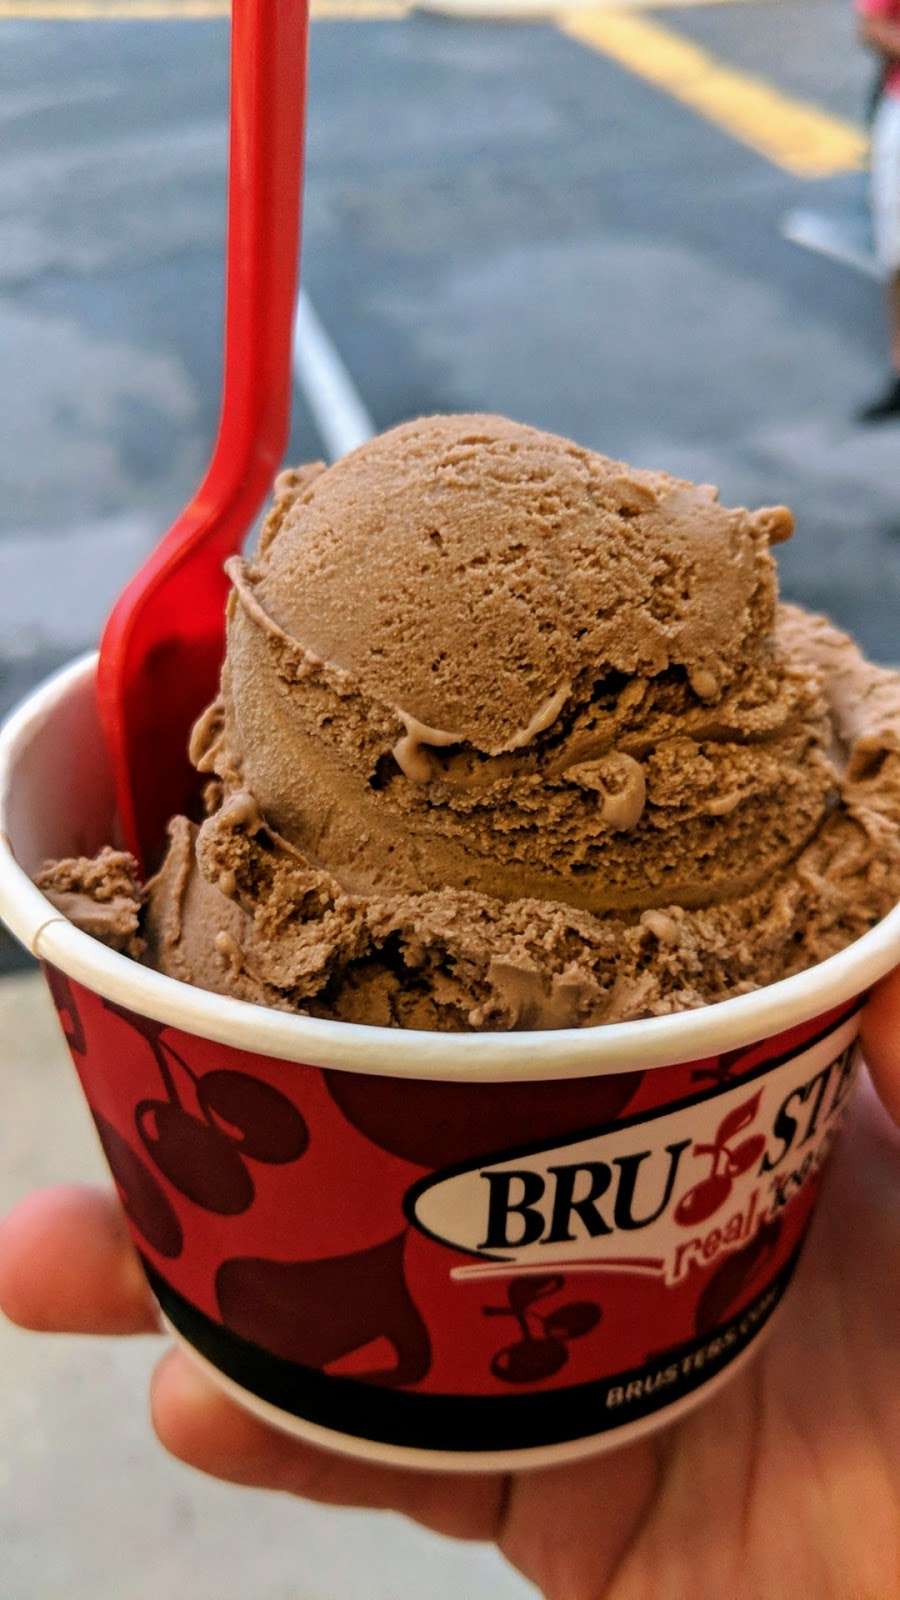 Brusters Ice Cream | 160 Ritchie Hwy, Severna Park, MD 21146 | Phone: (410) 793-5010